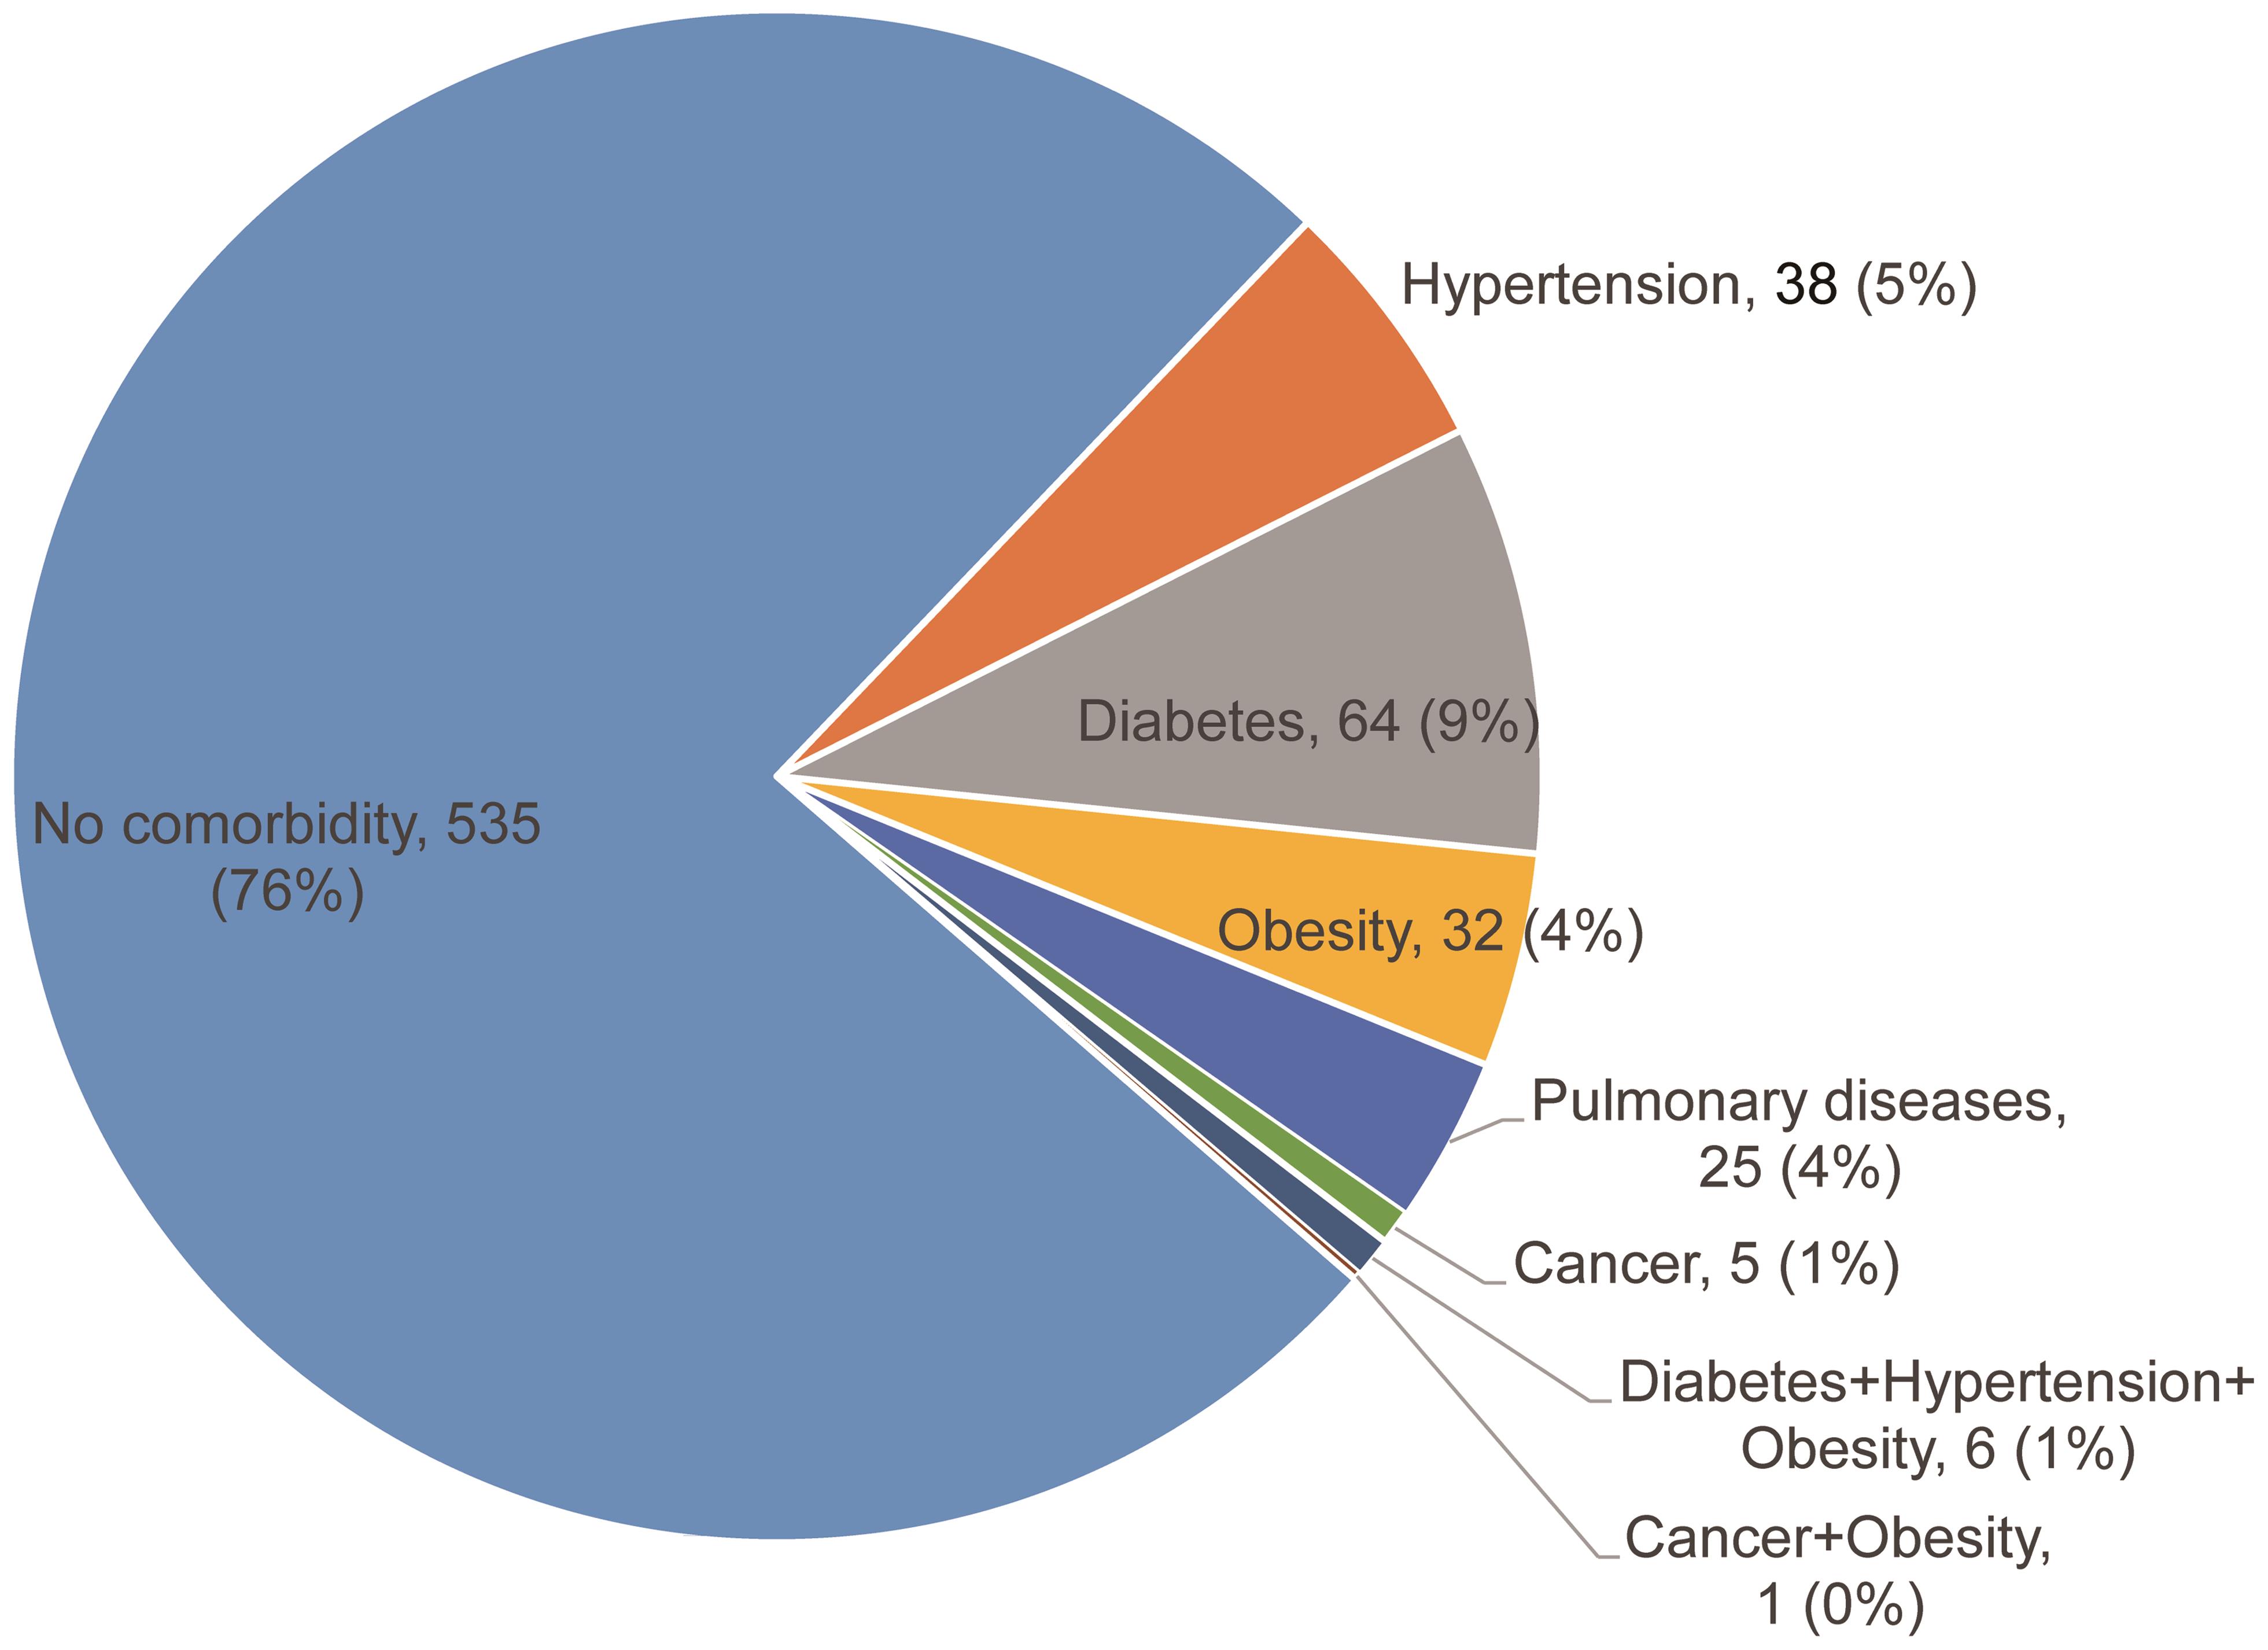 Status of comorbidity in participants that recovered from COVID-19 in the present survey.